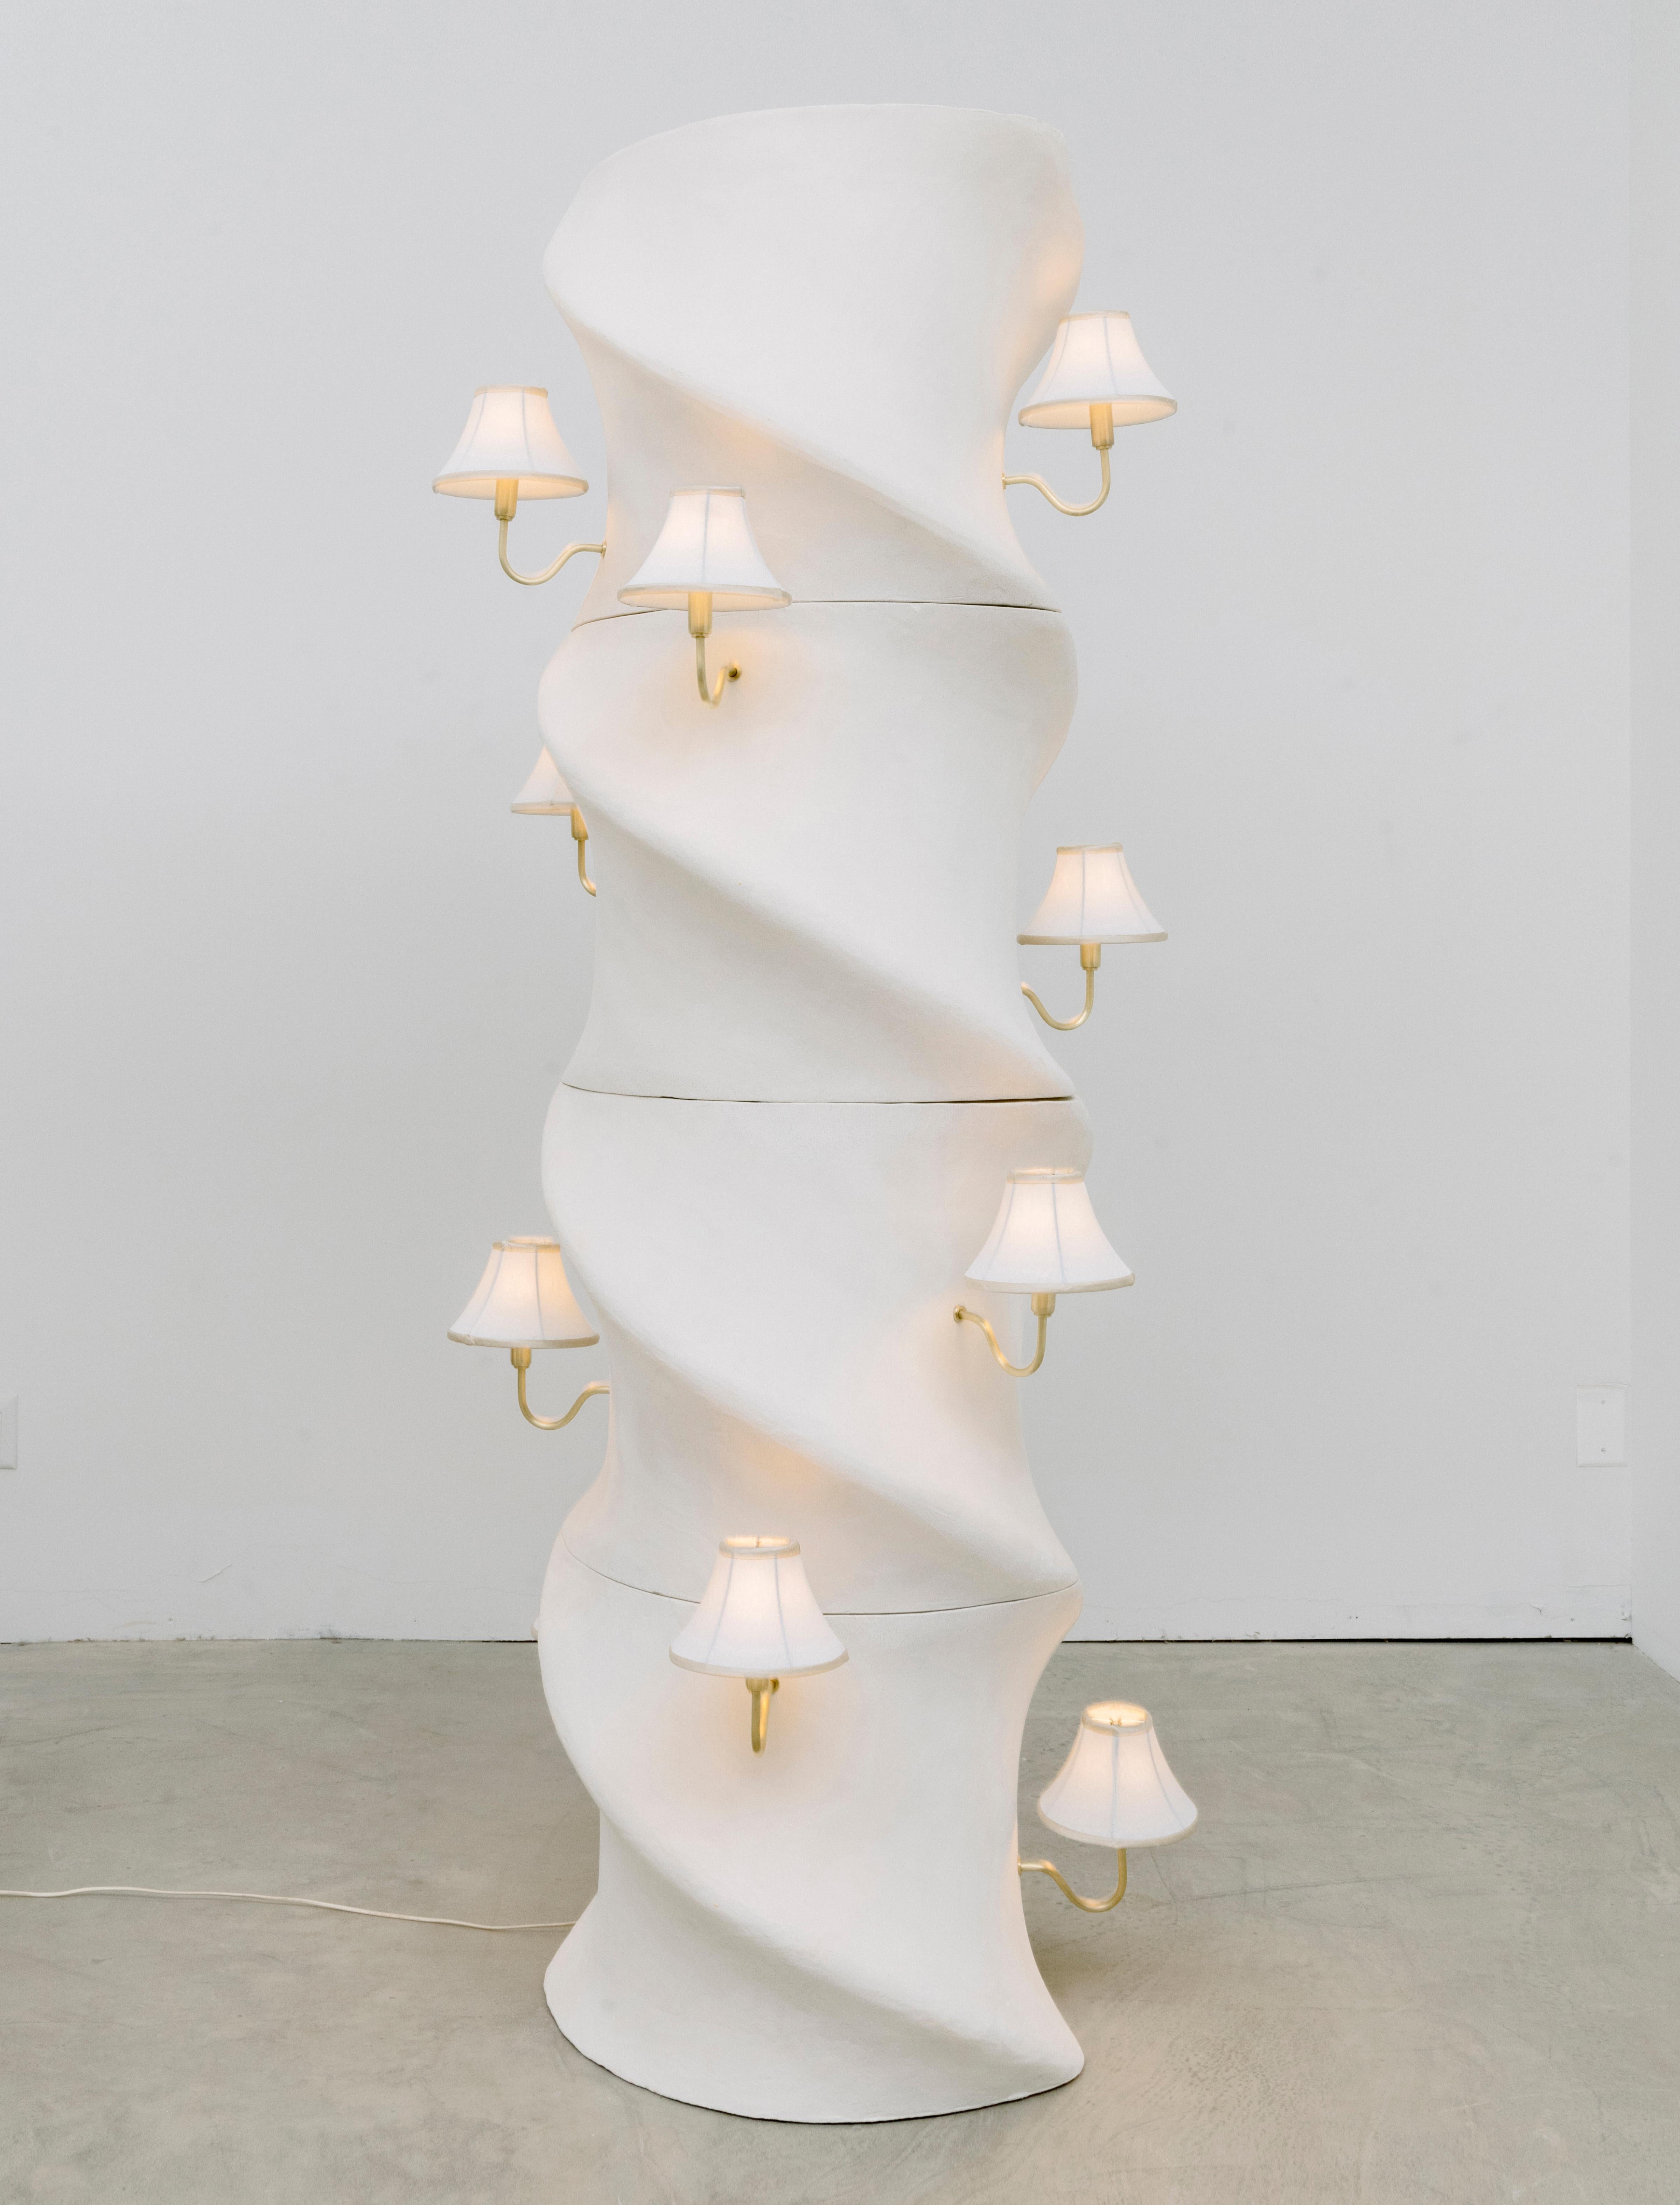 Objective Gallery are proud to debut Eny Lee Parker’s new collectible lighting at design Miami 2021.

Parker looks to our Neolithic past with her work taking inspiration from both prehistoric jewelry and architectural elements. Parker was once